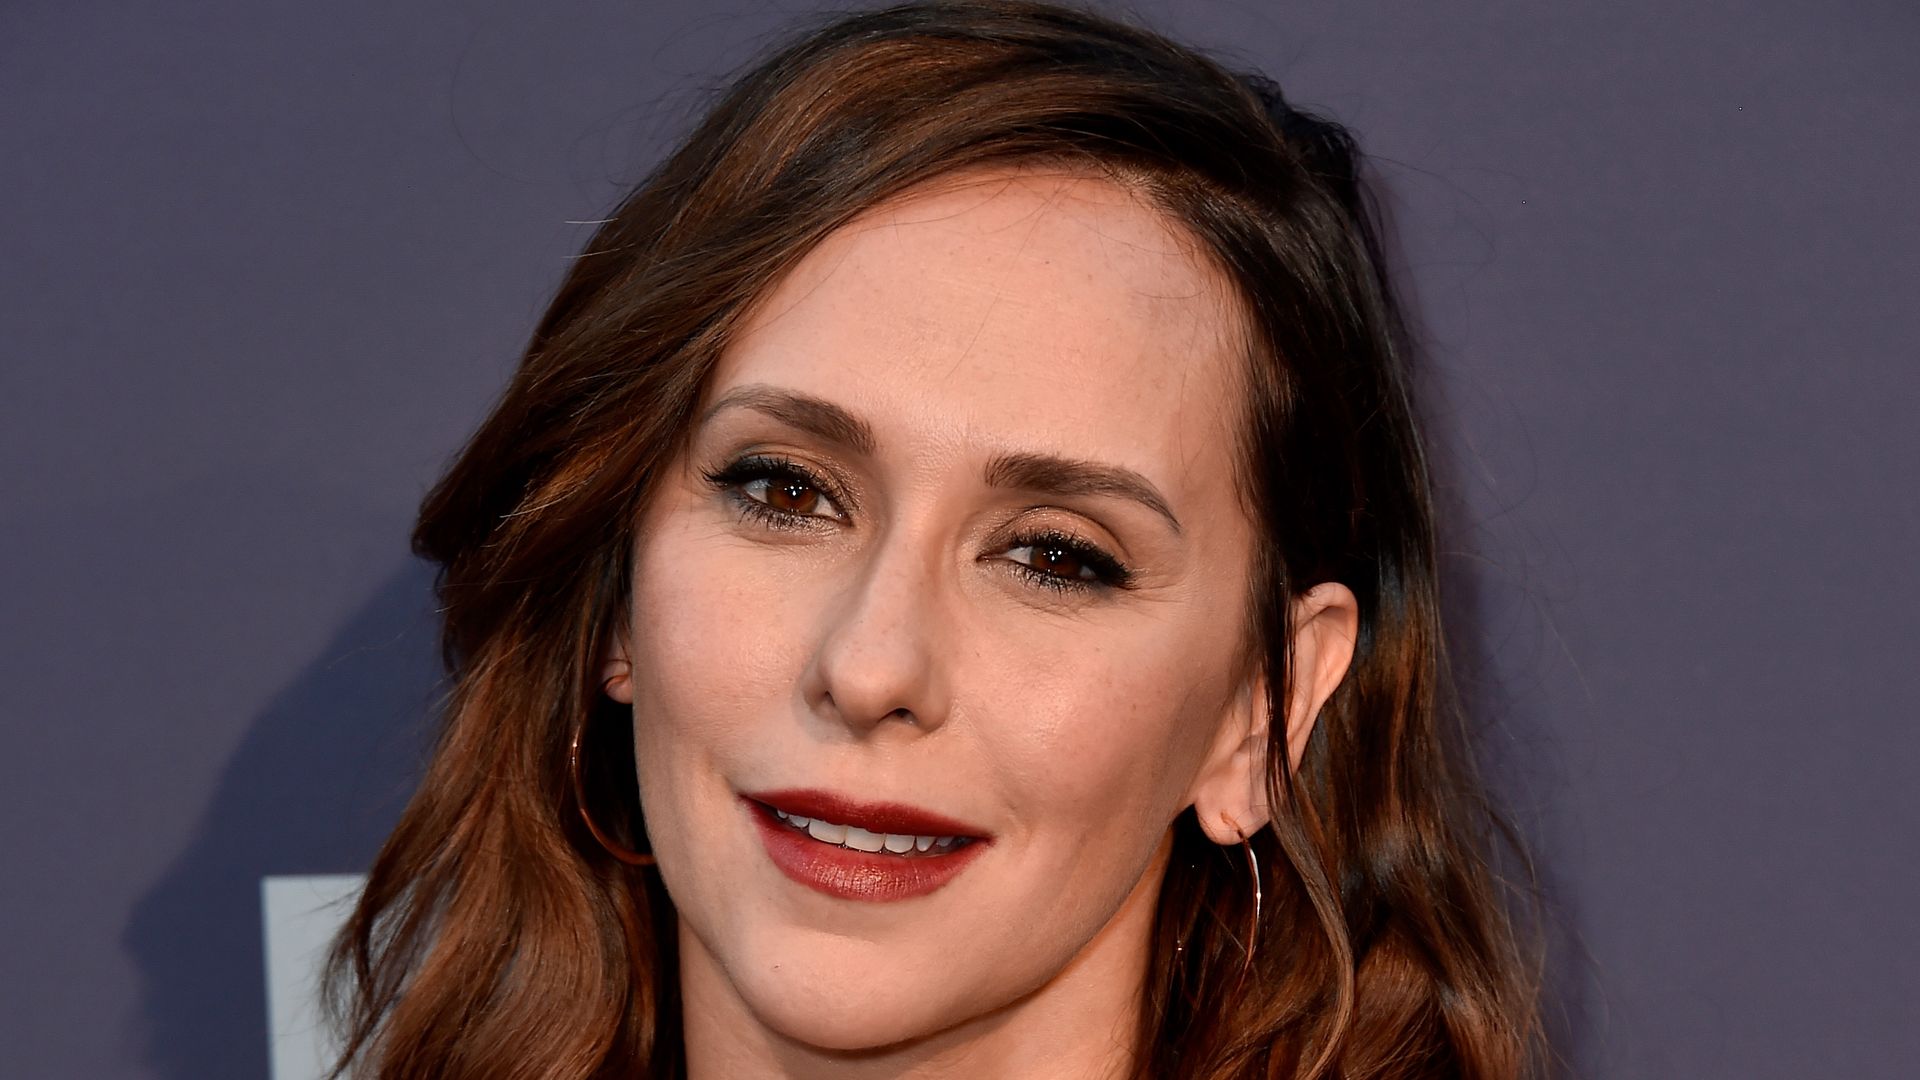 9-1-1 star Jennifer Love Hewitt returns to Lifetime for a brand new Christmas project – with her husband and three kids